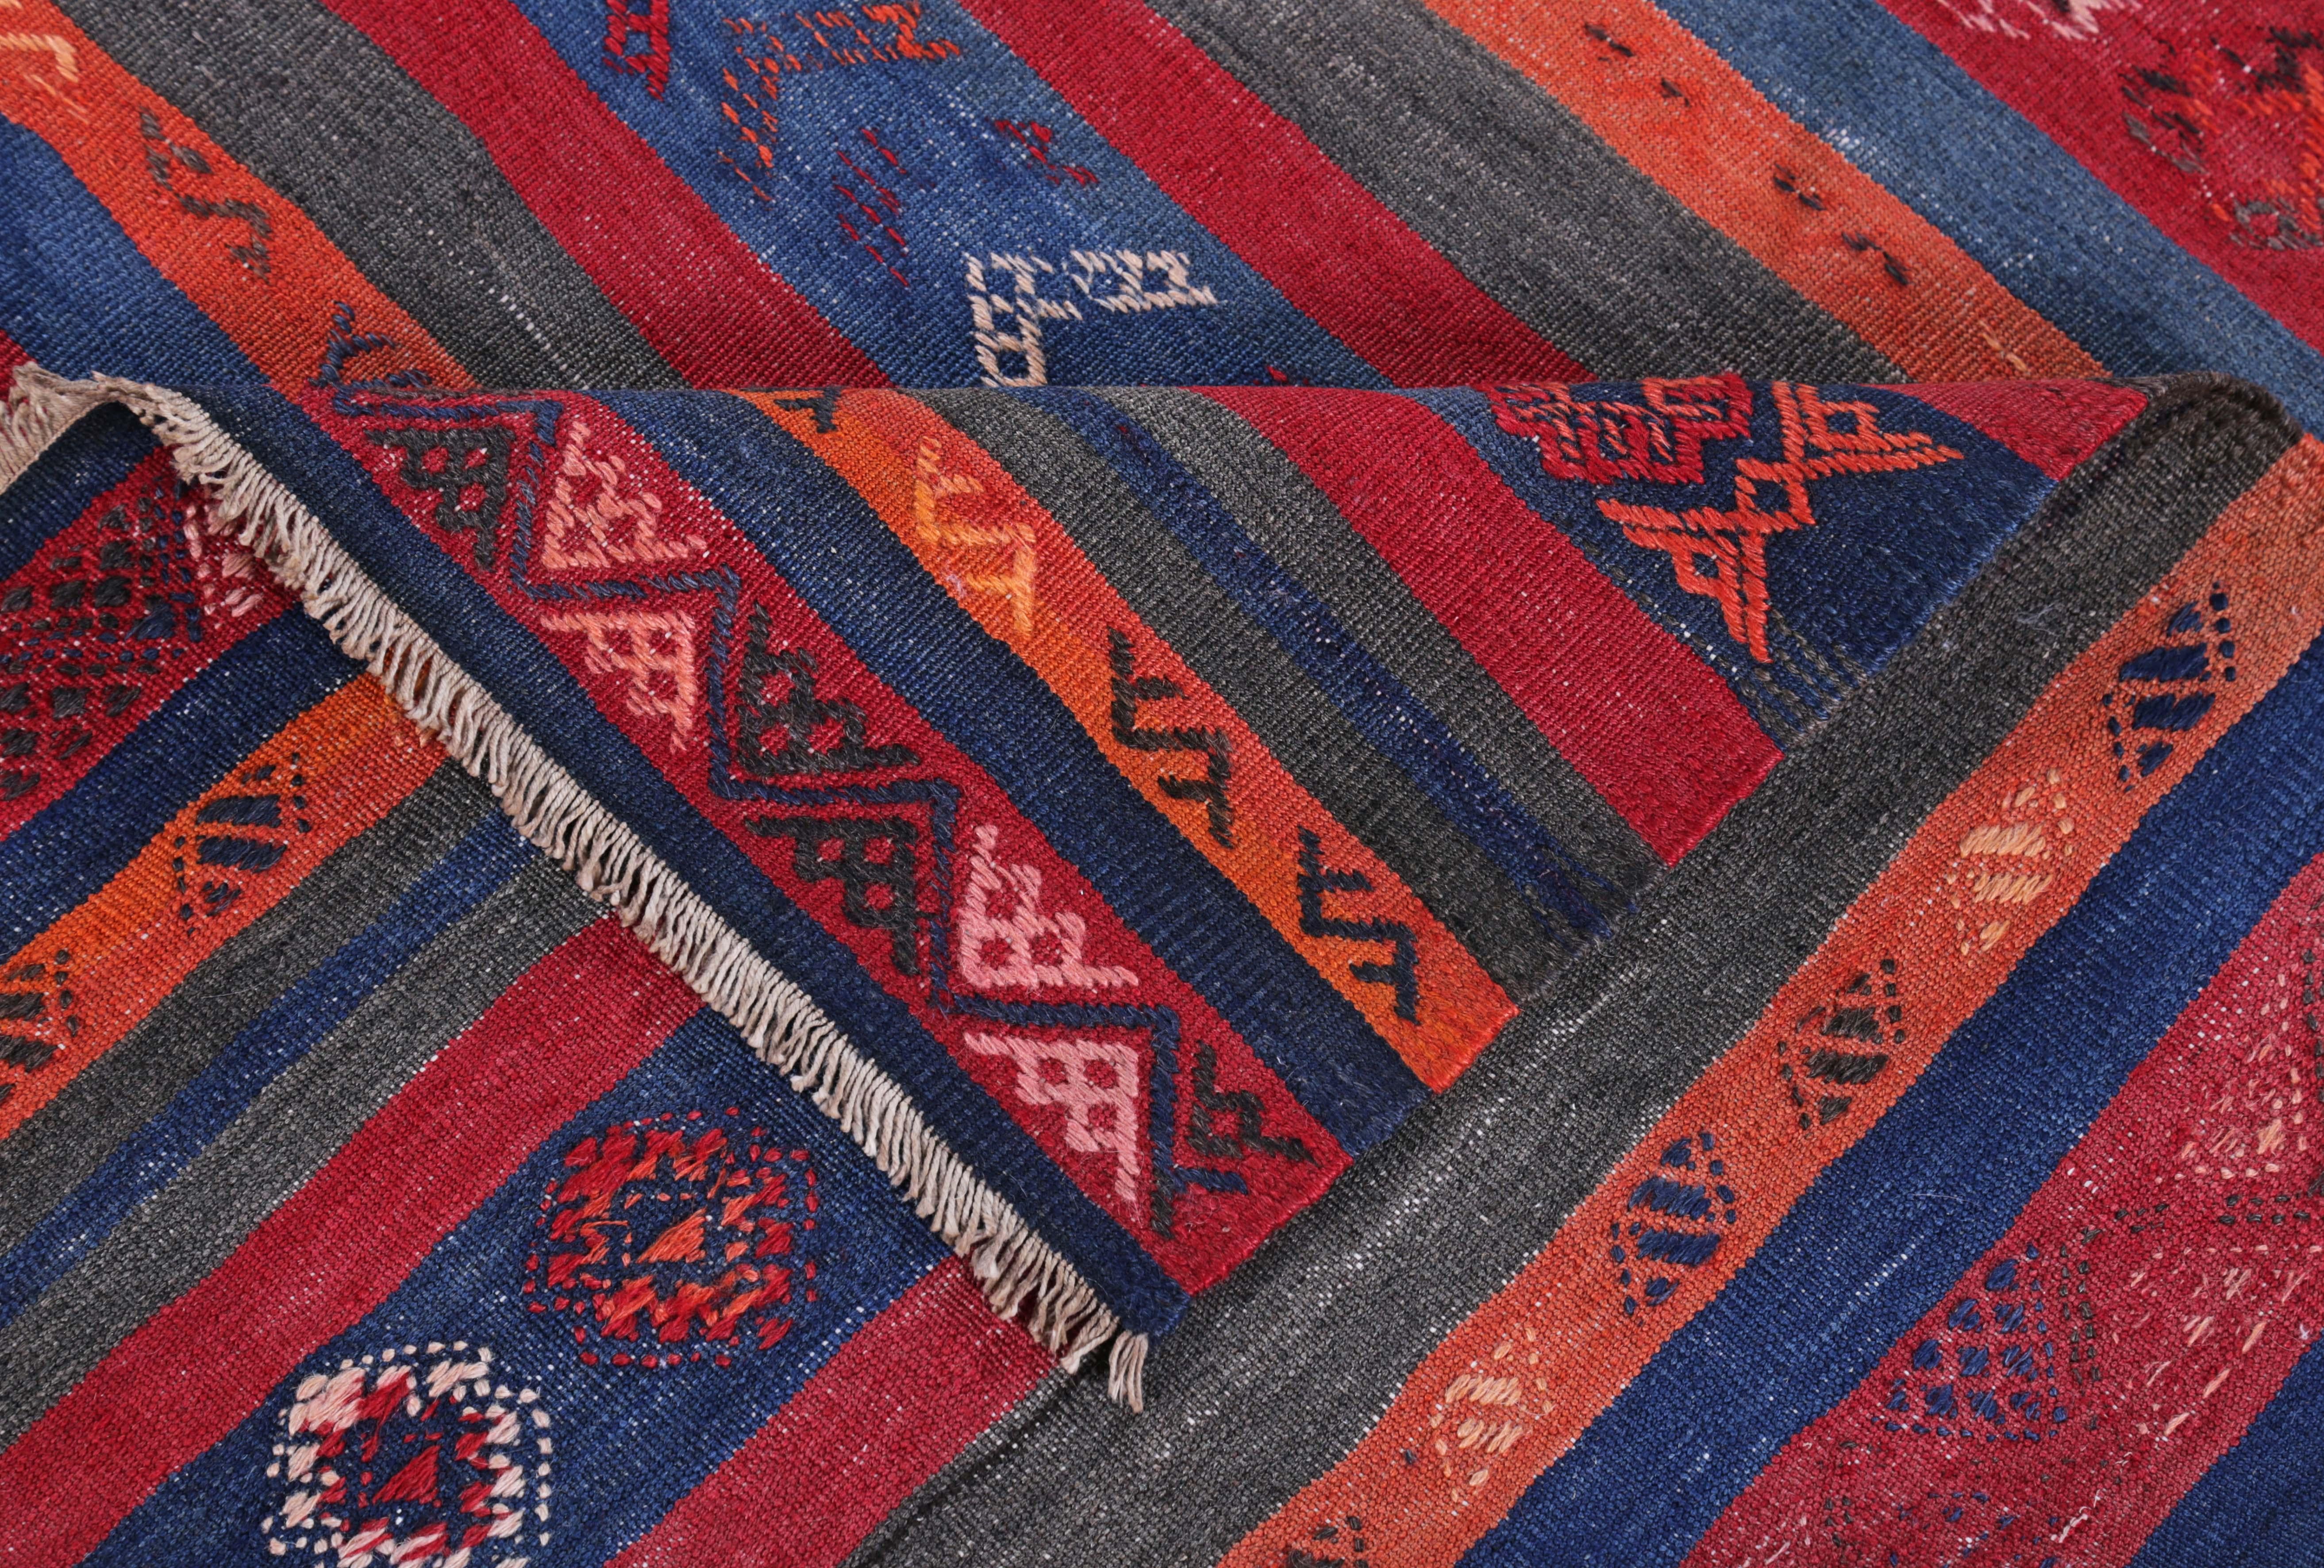 Hand-Woven Modern Turkish Kilim Rug with Red, Blue and Orange Stripes with Tribal Design For Sale